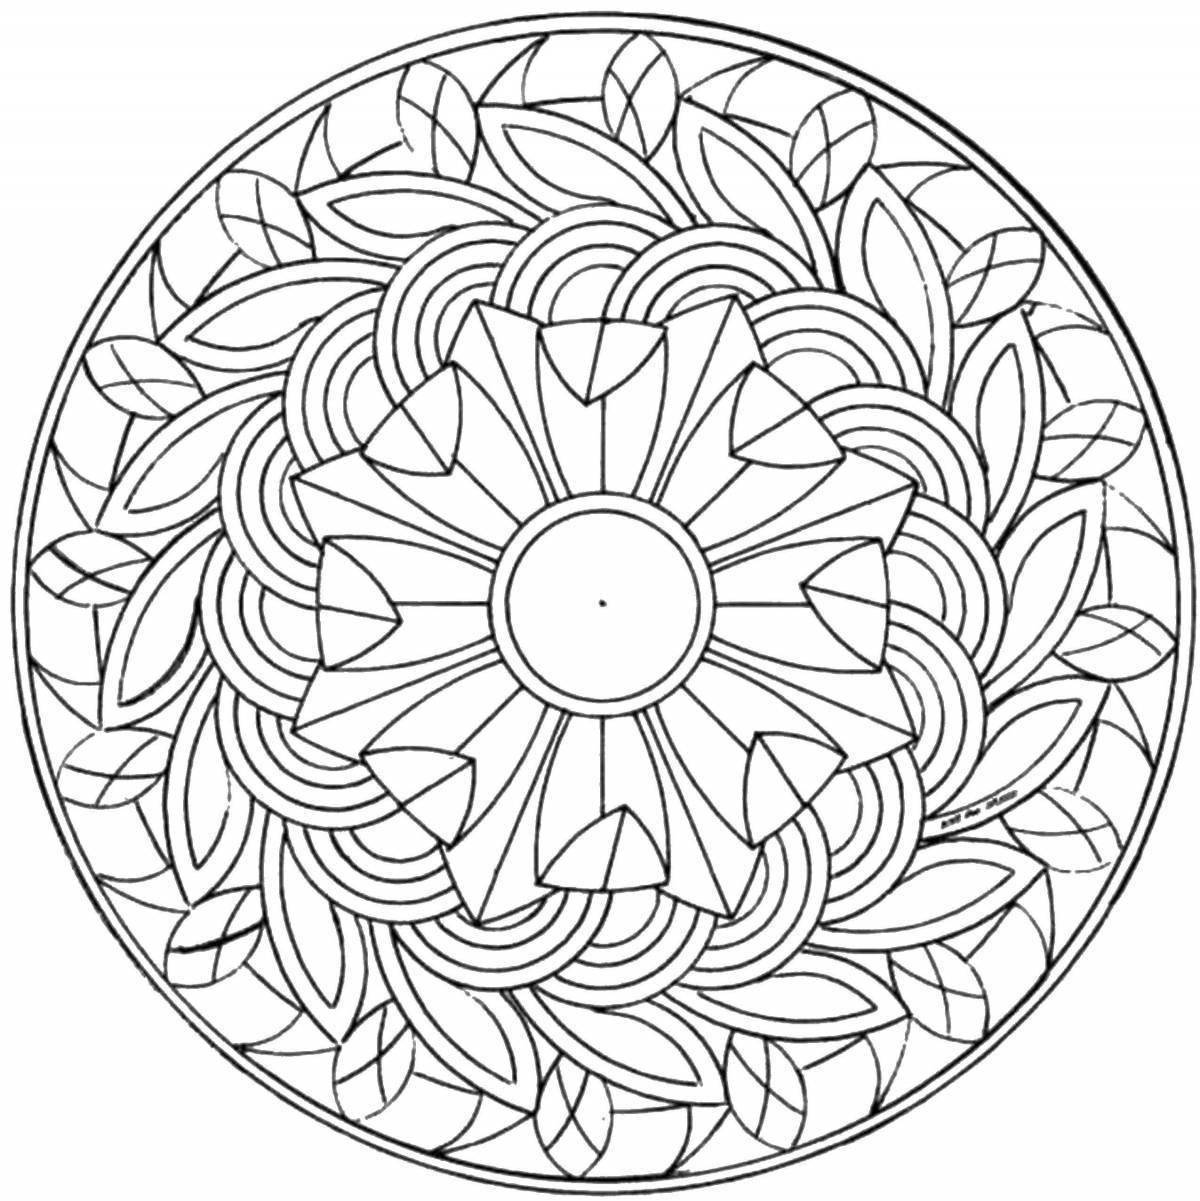 Glowing round coloring book